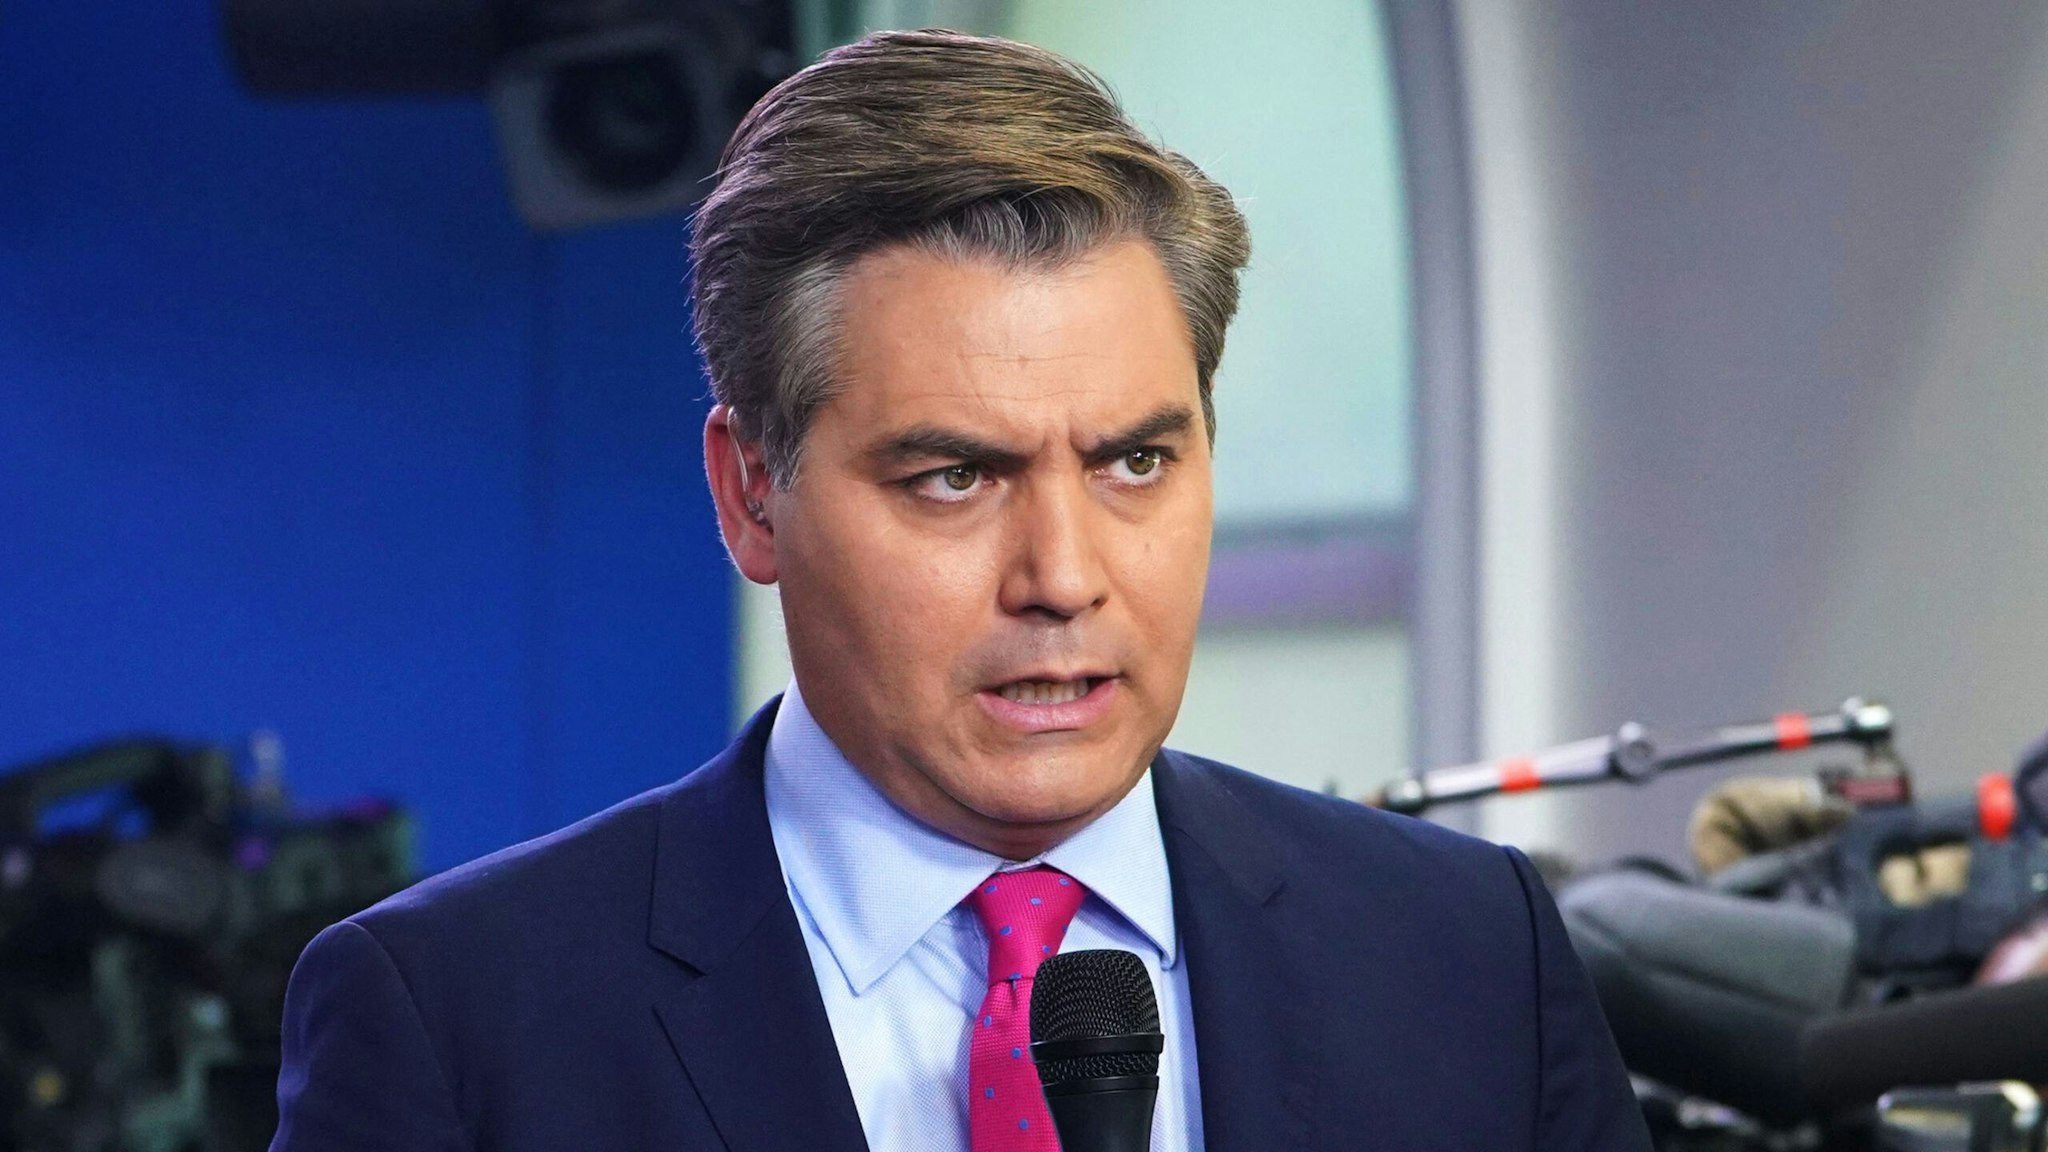 CNN chief White House correspondent Jim Acosta is seen before a briefing by White House Press Secretary Sarah Sanders in the Brady Briefing Room of the White House in Washington, DC on October 3, 2018.